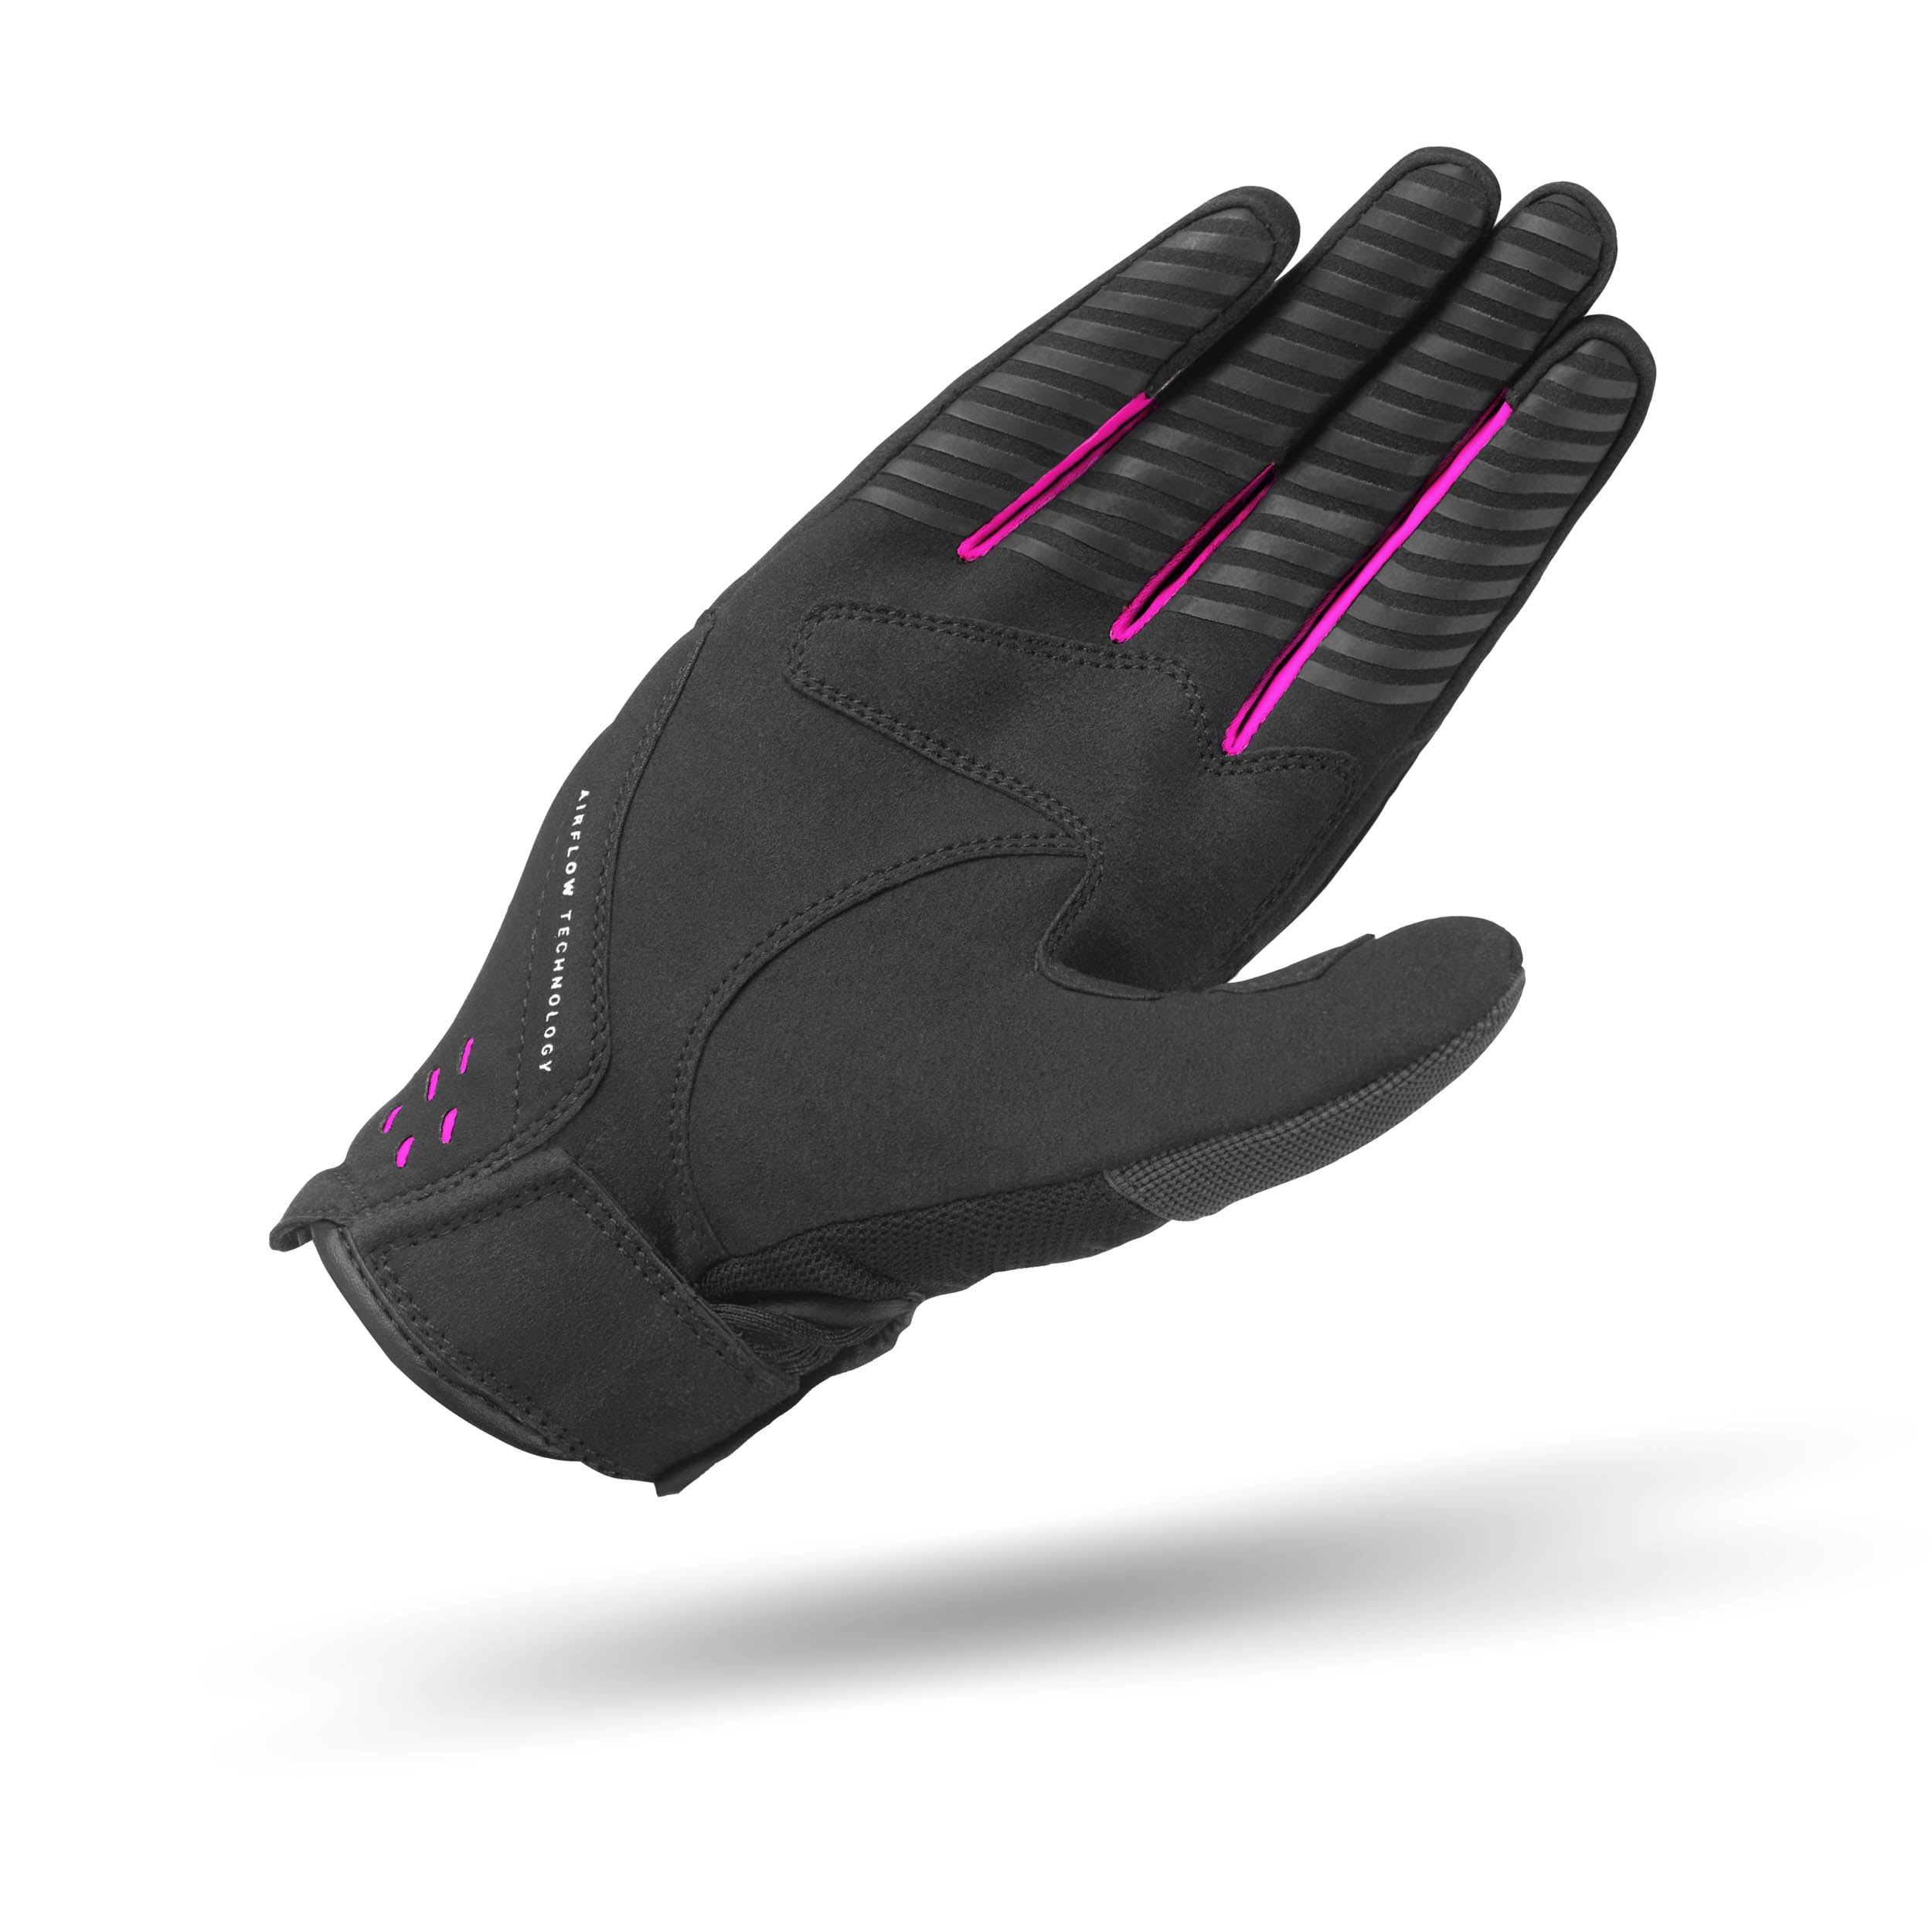 A PALM OF SHIMA EVO ONE LADY GLOVES IN BLACK AND PINK